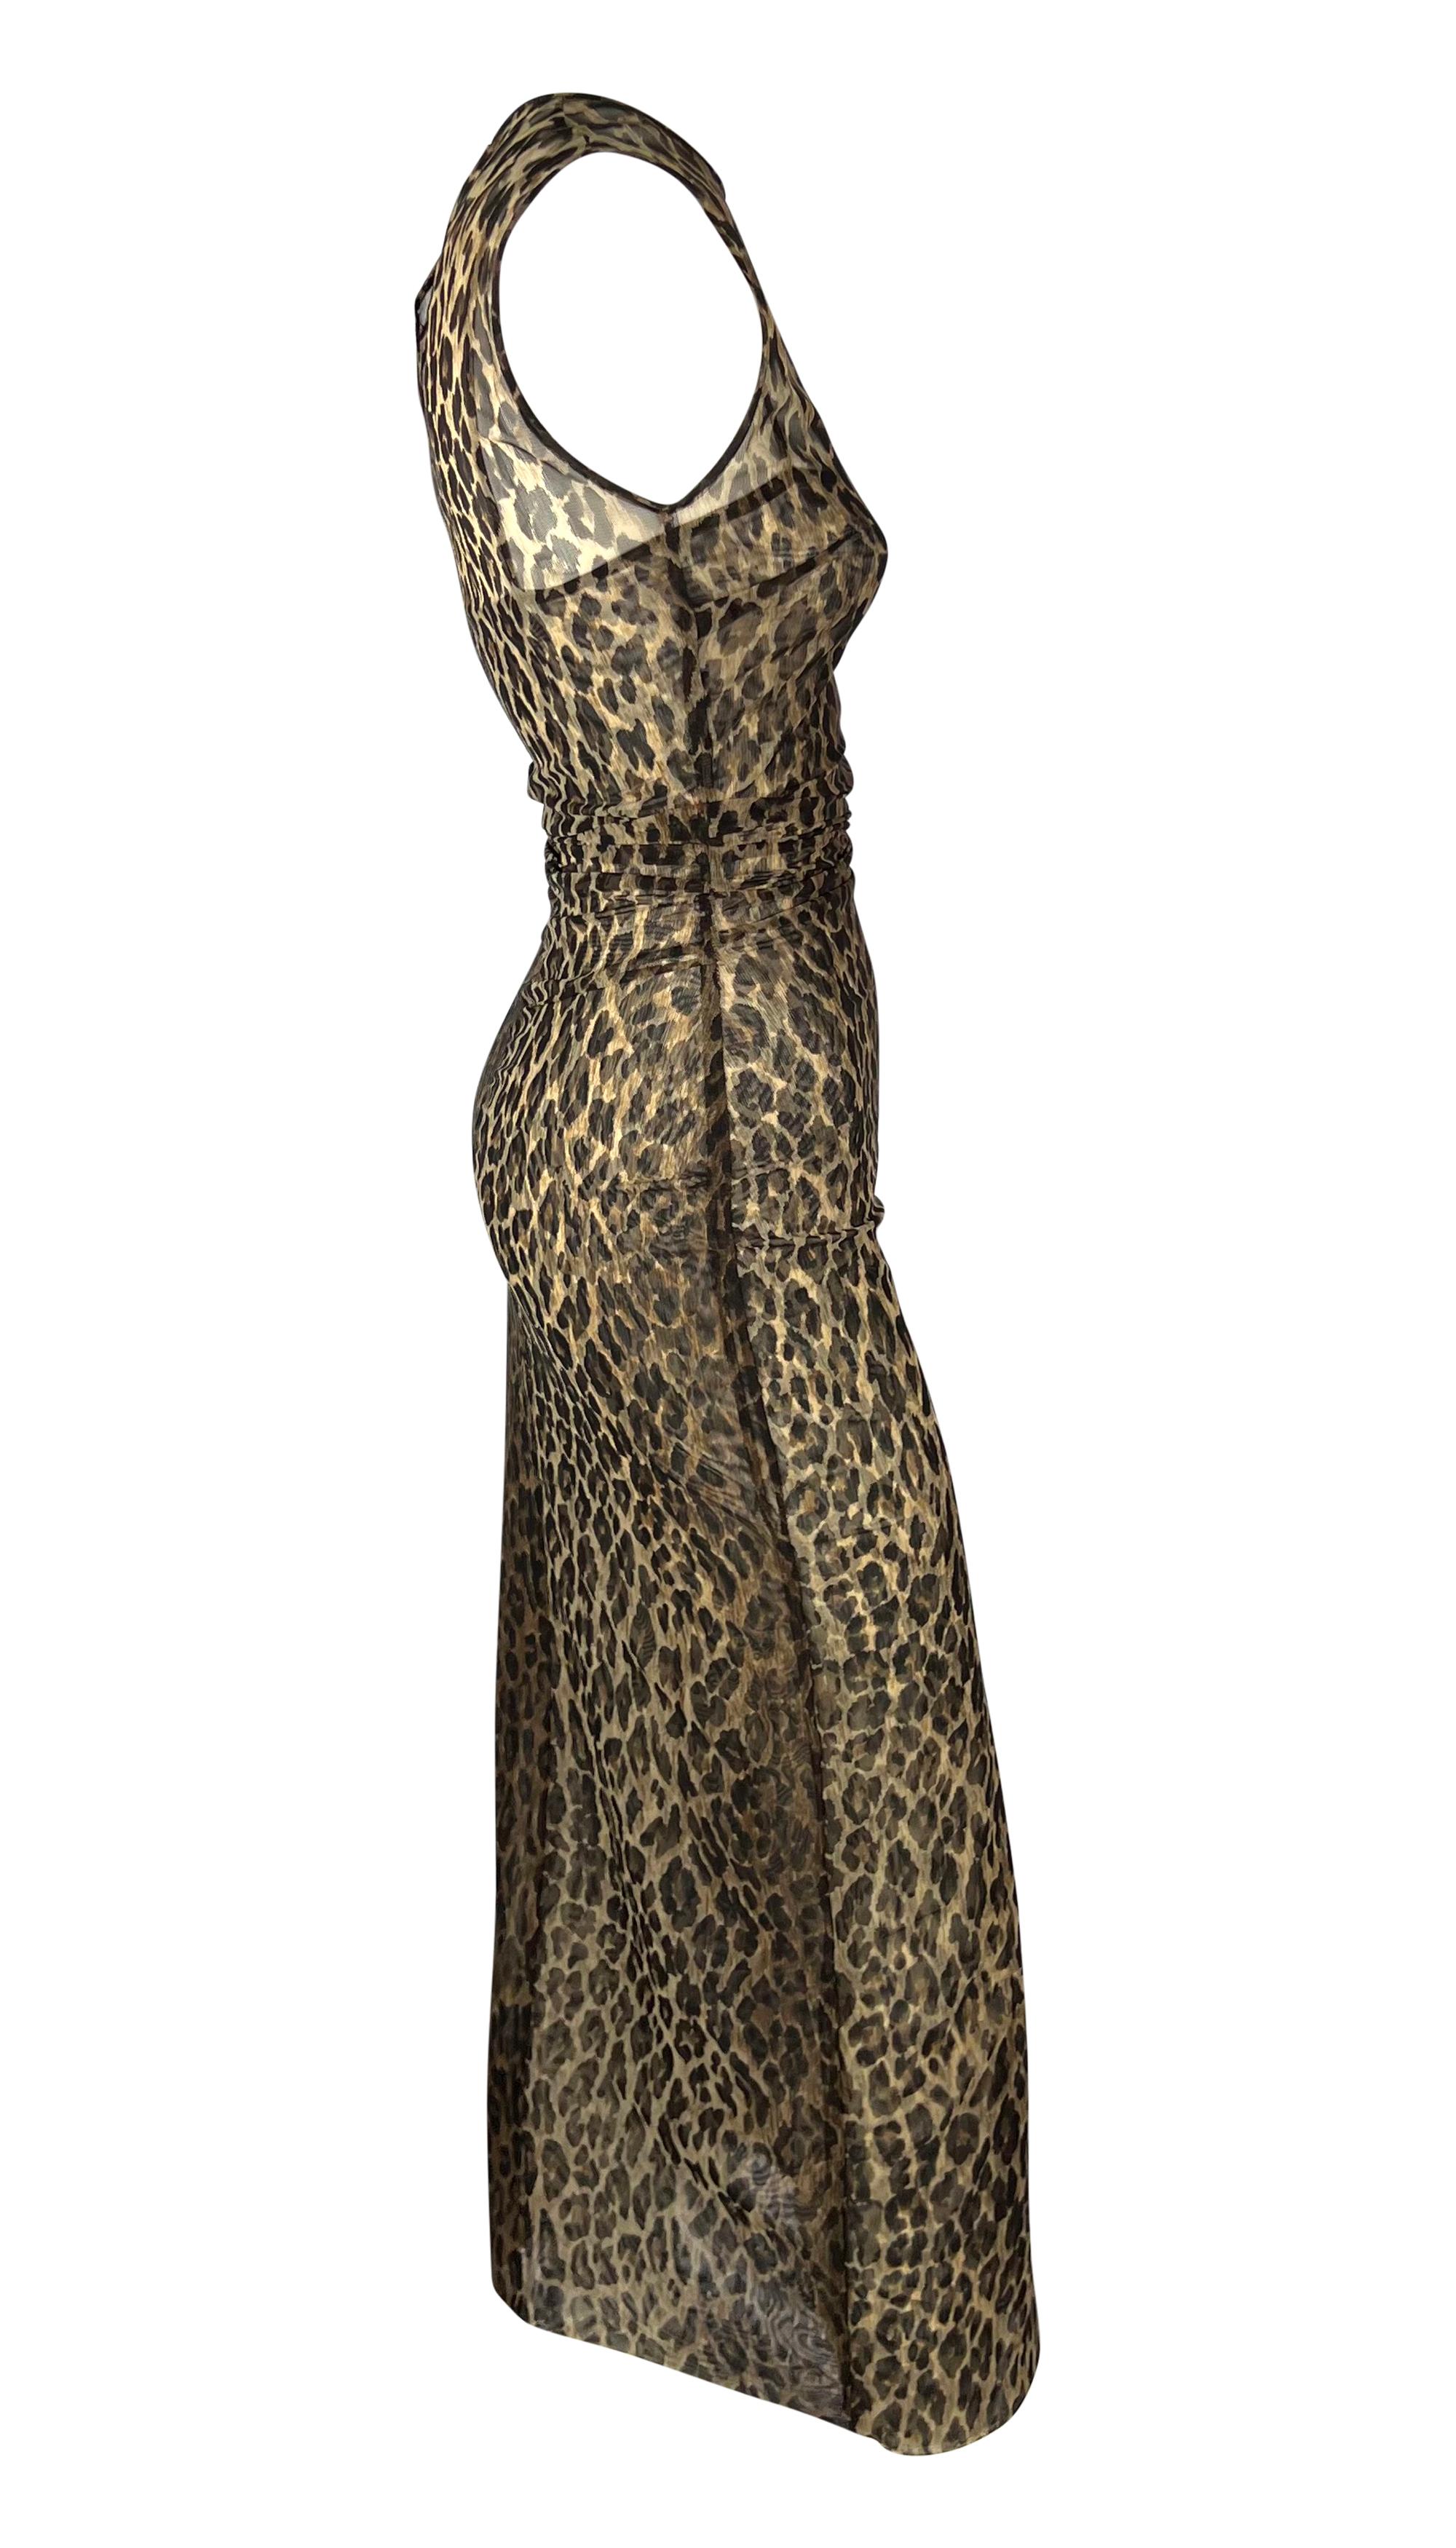 Late 1990s Dolce & Gabbana Sheer Sleeveless Cheetah Print Ruched Bodycon Dress For Sale 2